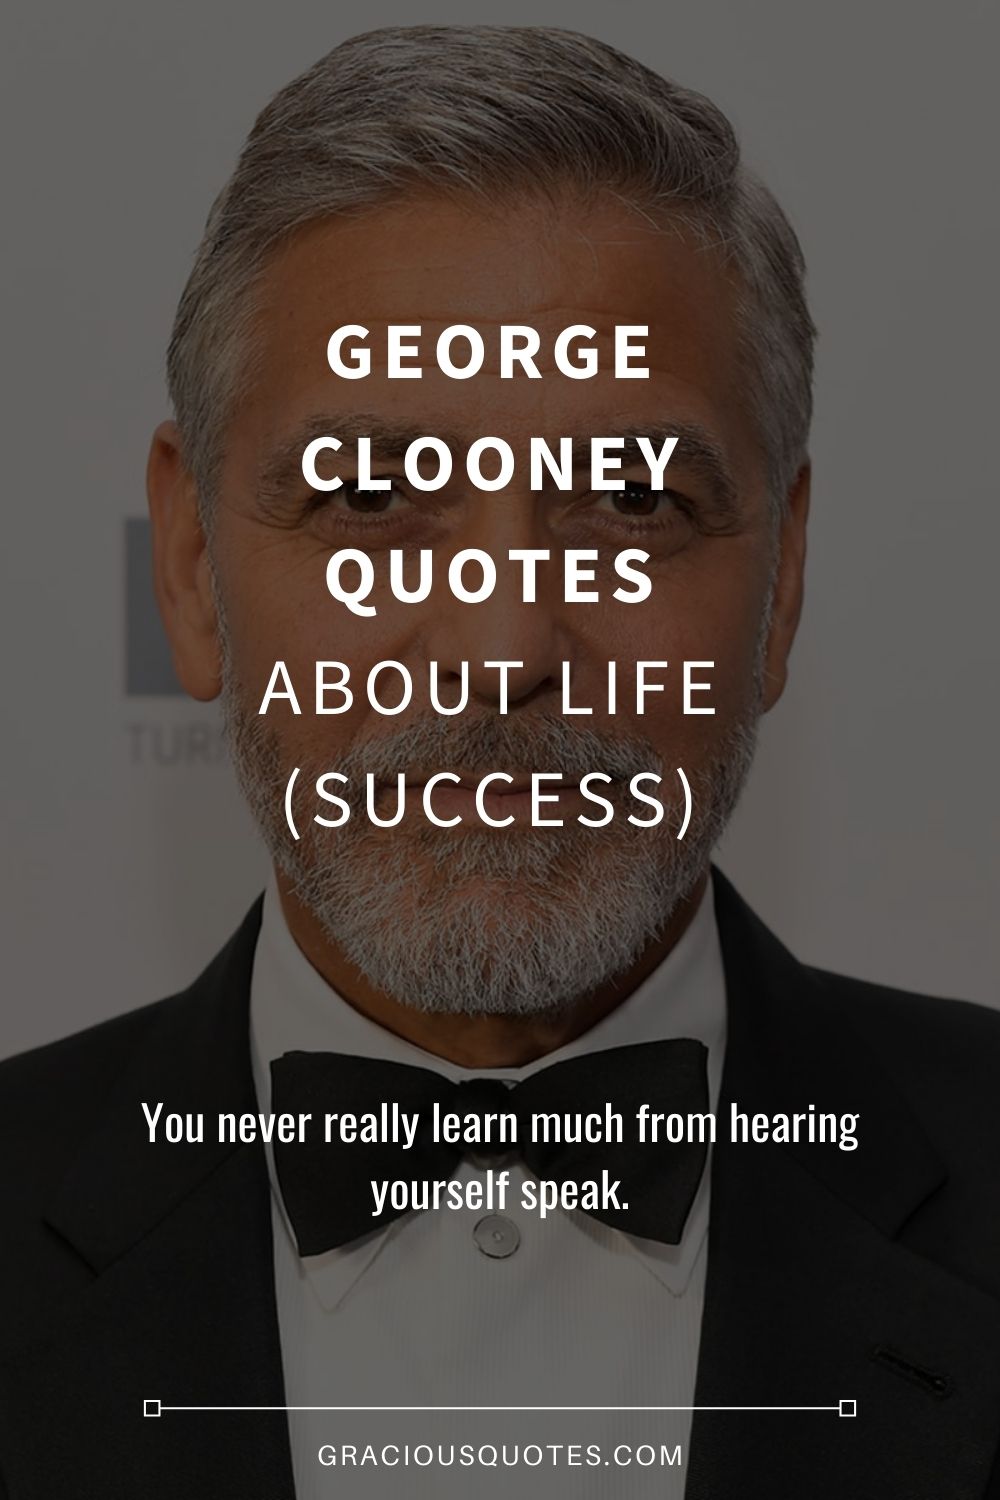 George Clooney Quotes About Life (SUCCESS) - Gracious Quotes